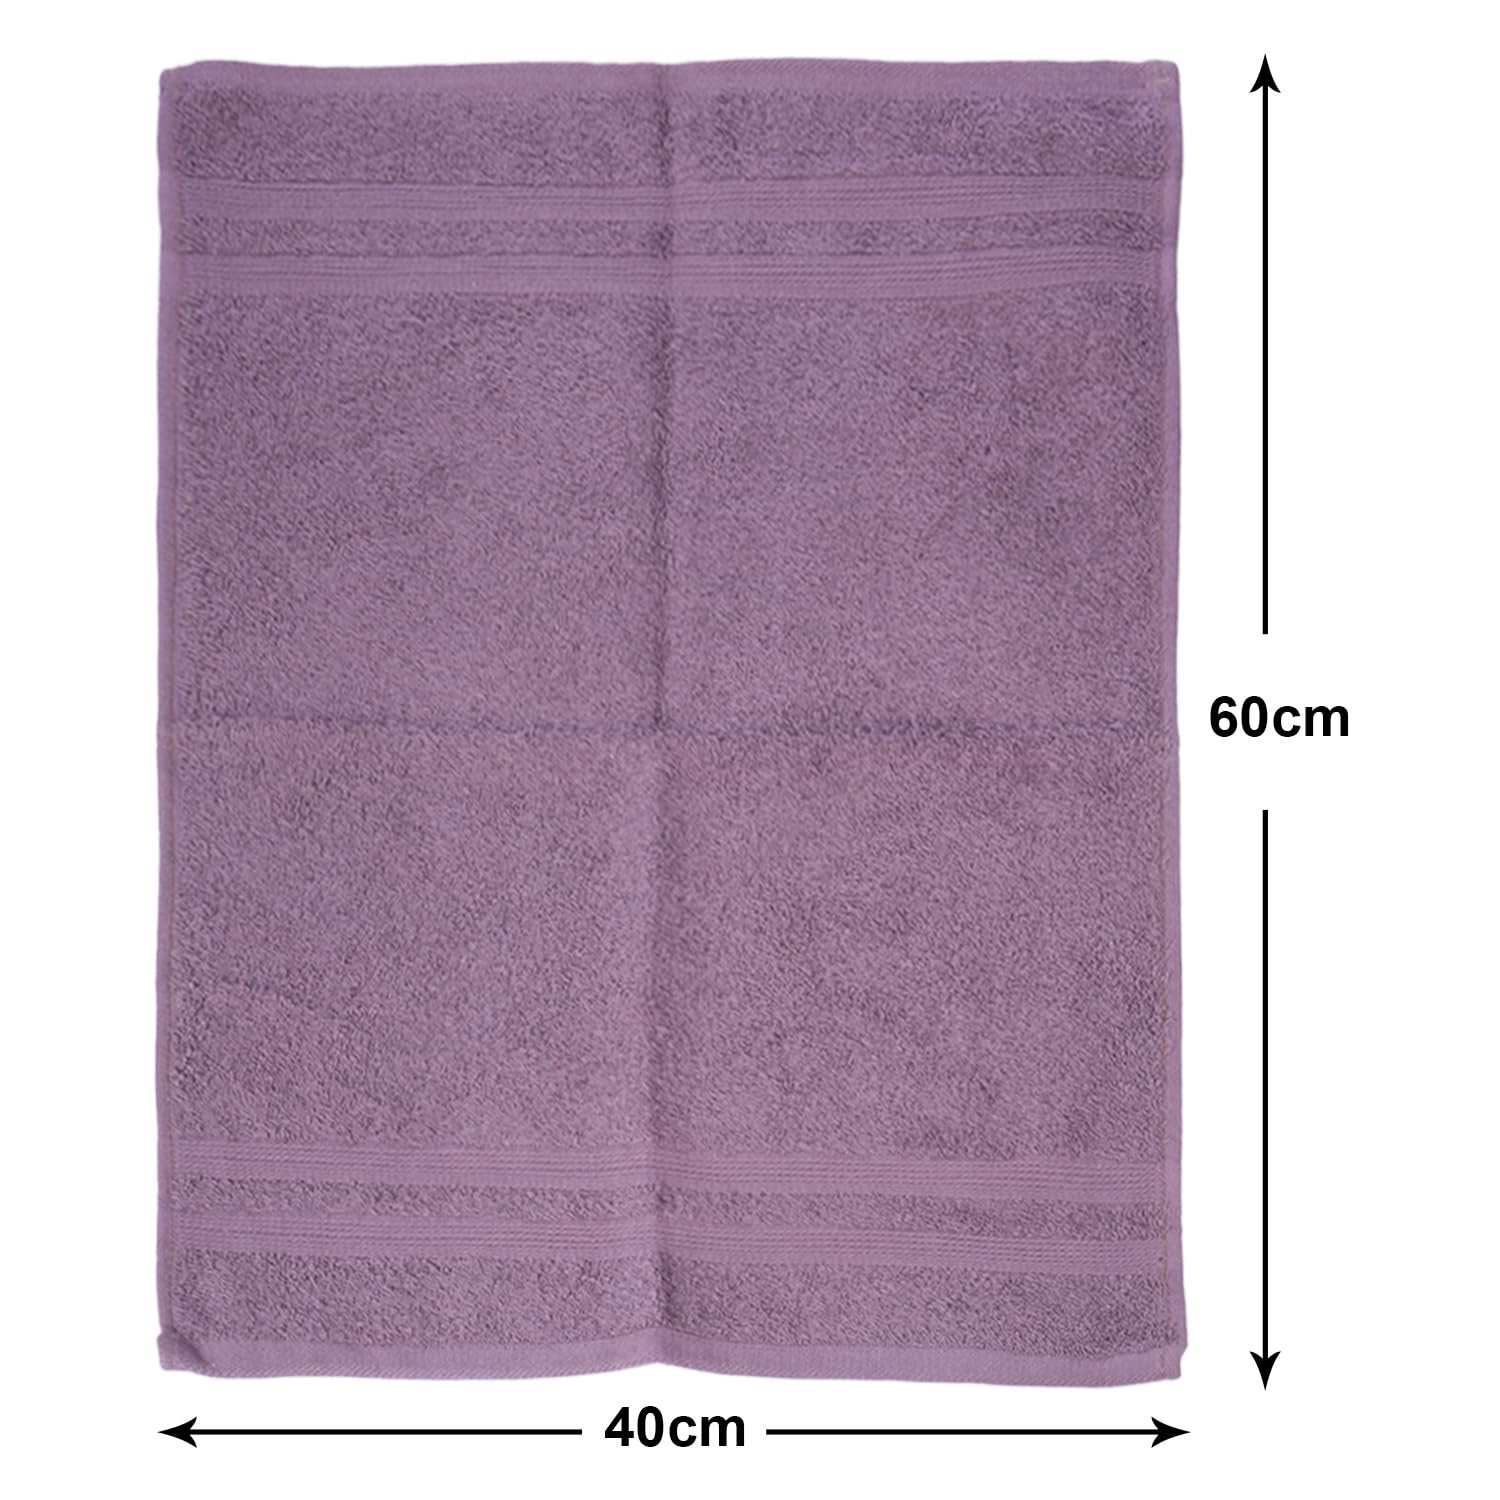 Kuber Industries 525 GSM Cotton Hand towels |Super Soft, Quick Absorbent & Anti-Bacterial|Gym & Workout Towels|Pack of 2 (Purple & Green)